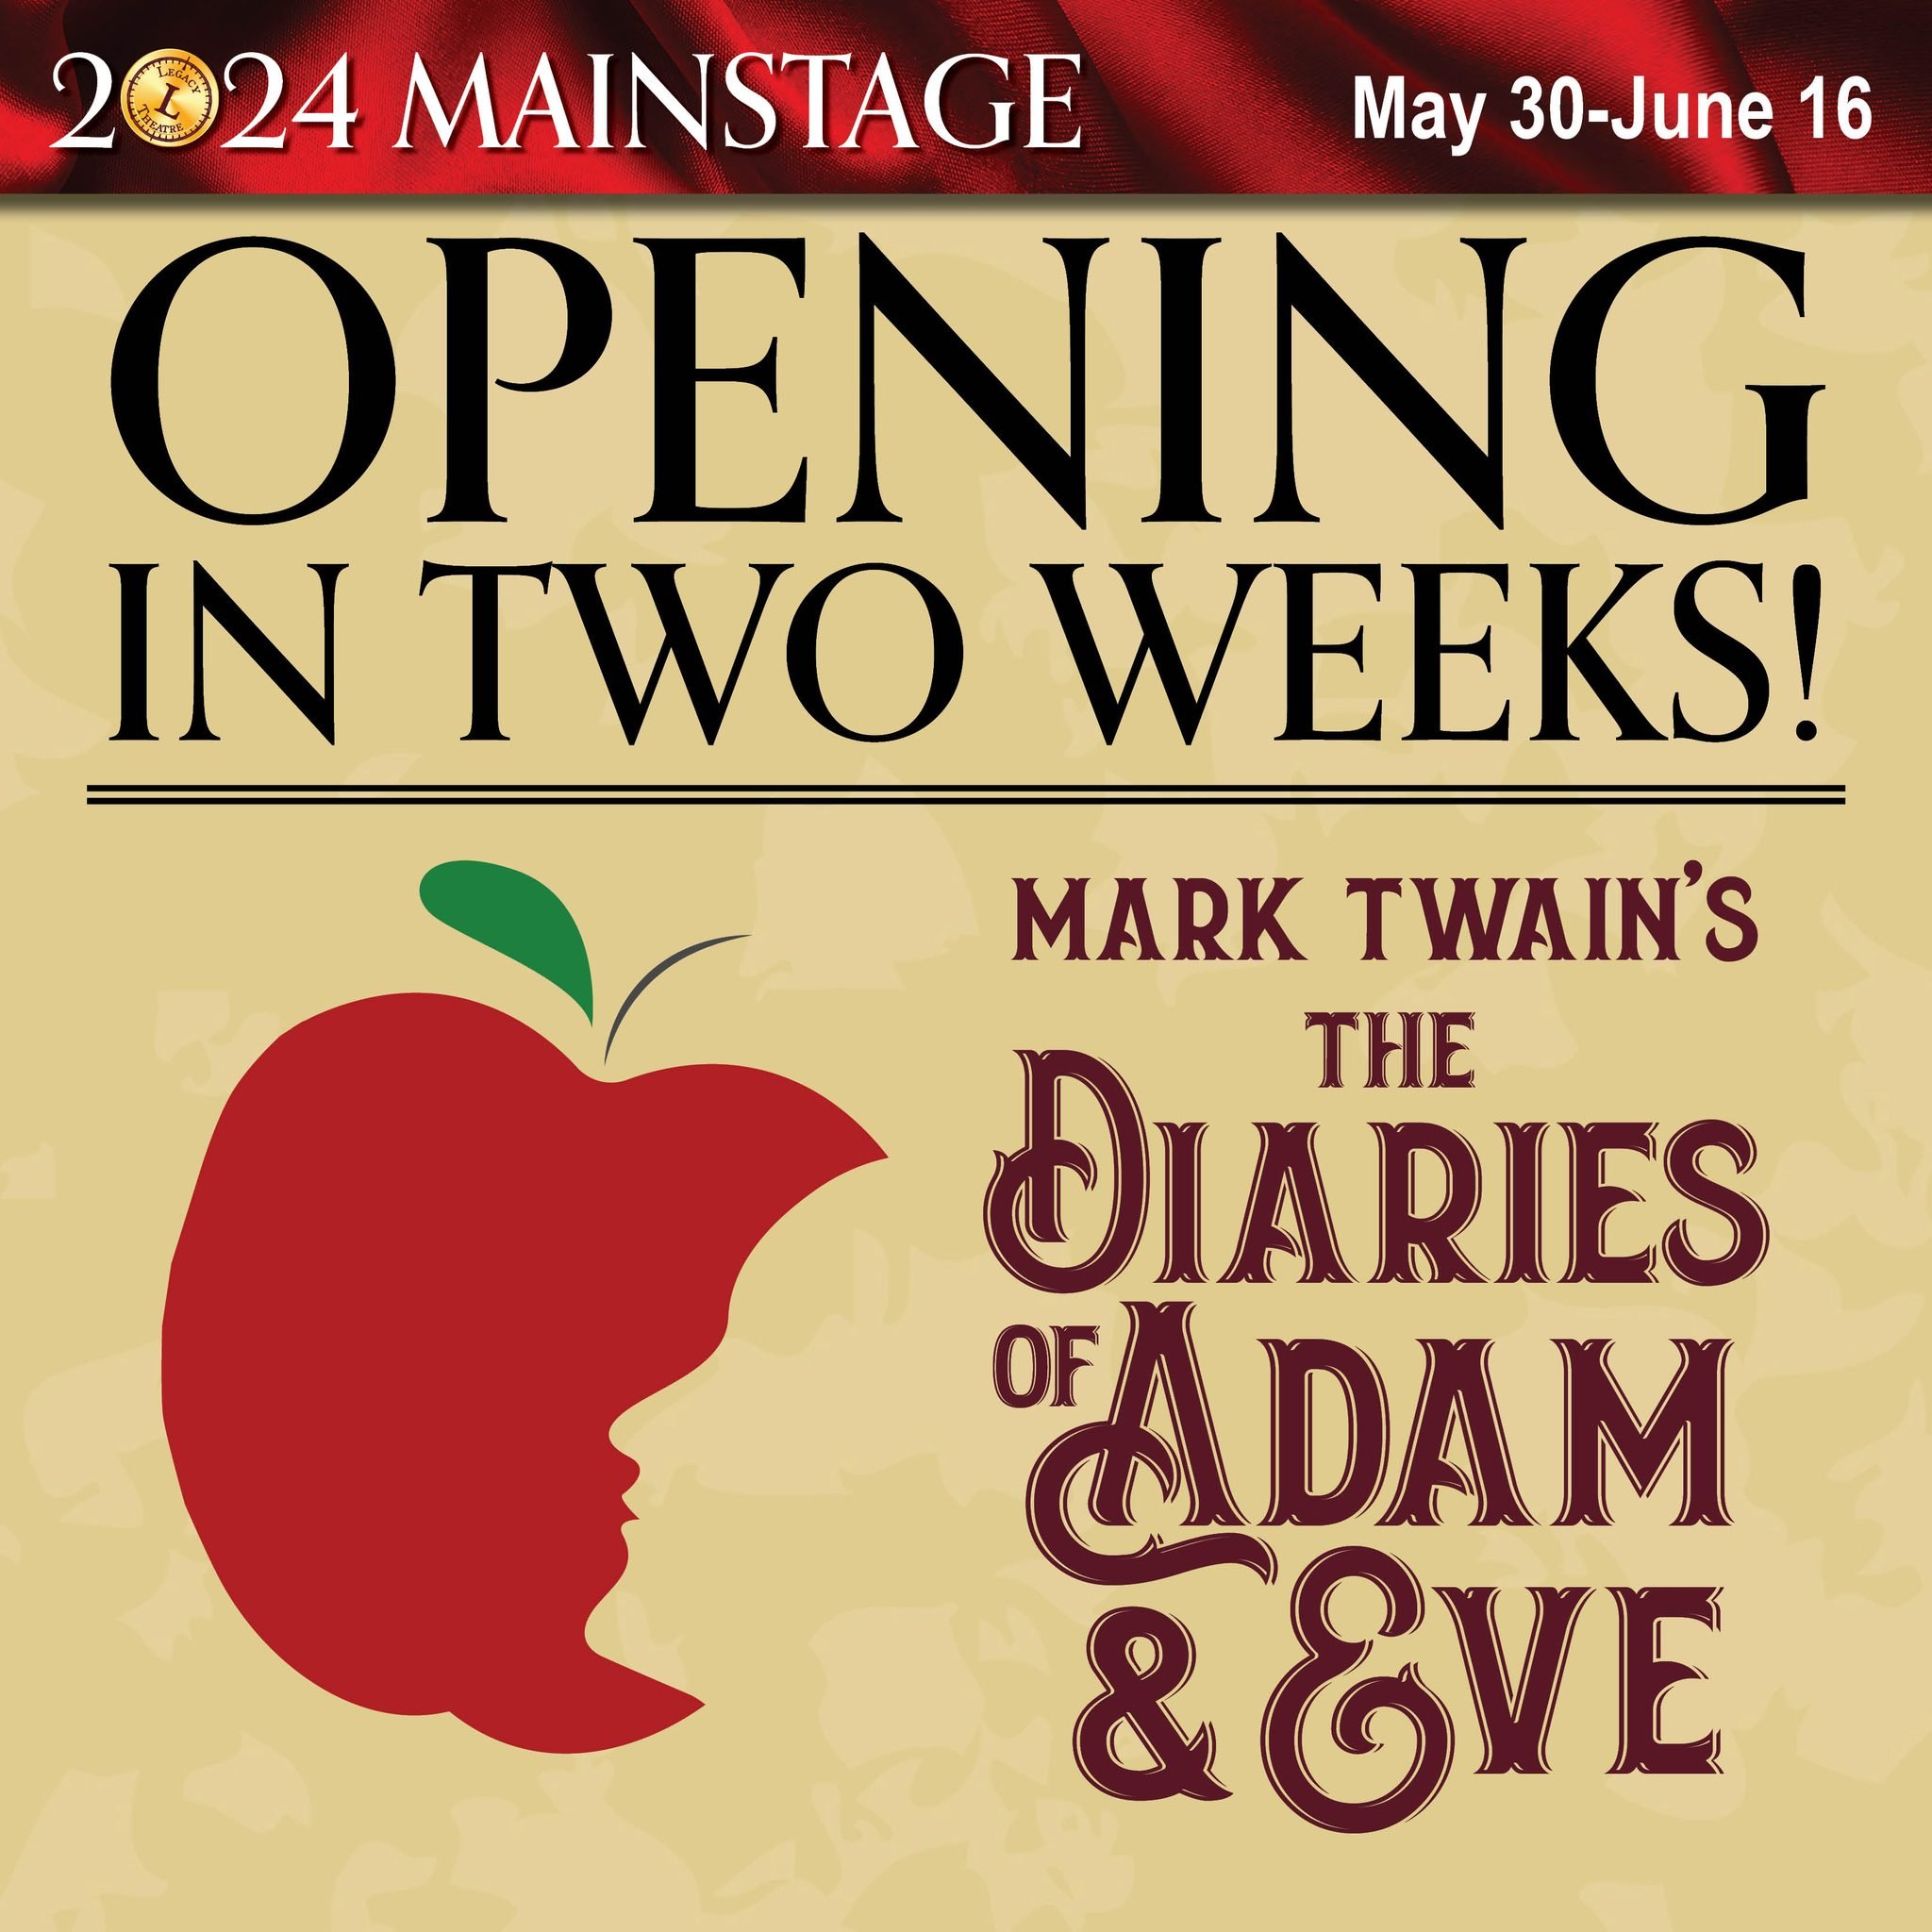 Can you believe we are only 2 weeks out from the opening night performance of Mark Twain&rsquo;s The Diaries of Adam and Eve? We can&rsquo;t wait to kick off our 2024 Mainstage Season with this entertaining adaptation of a Mark Twain classic. Book to